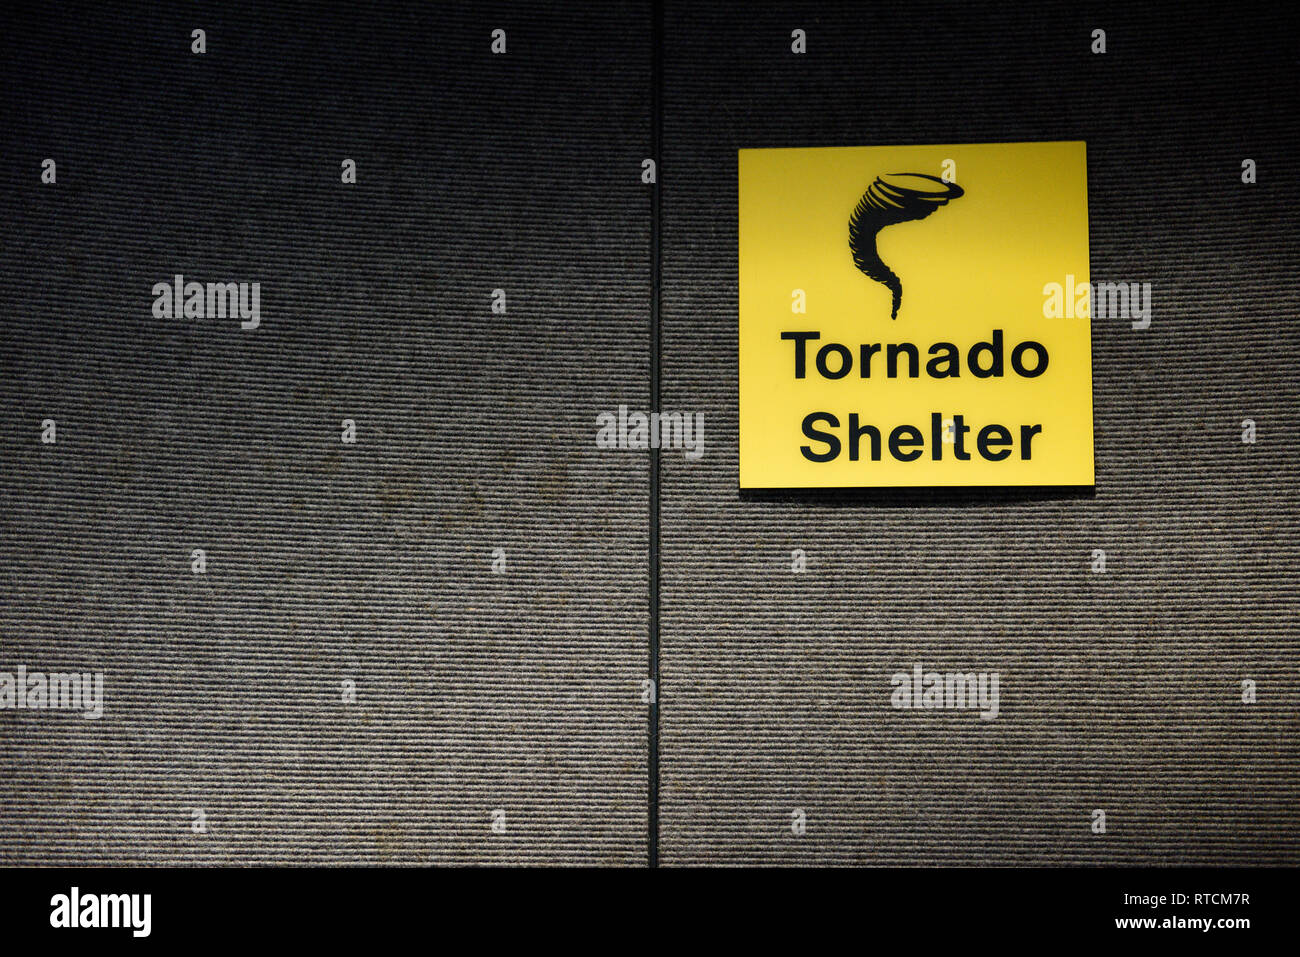 Tornado shelter yellow sign designating a safe room area, with tornado or twister icon Stock Photo